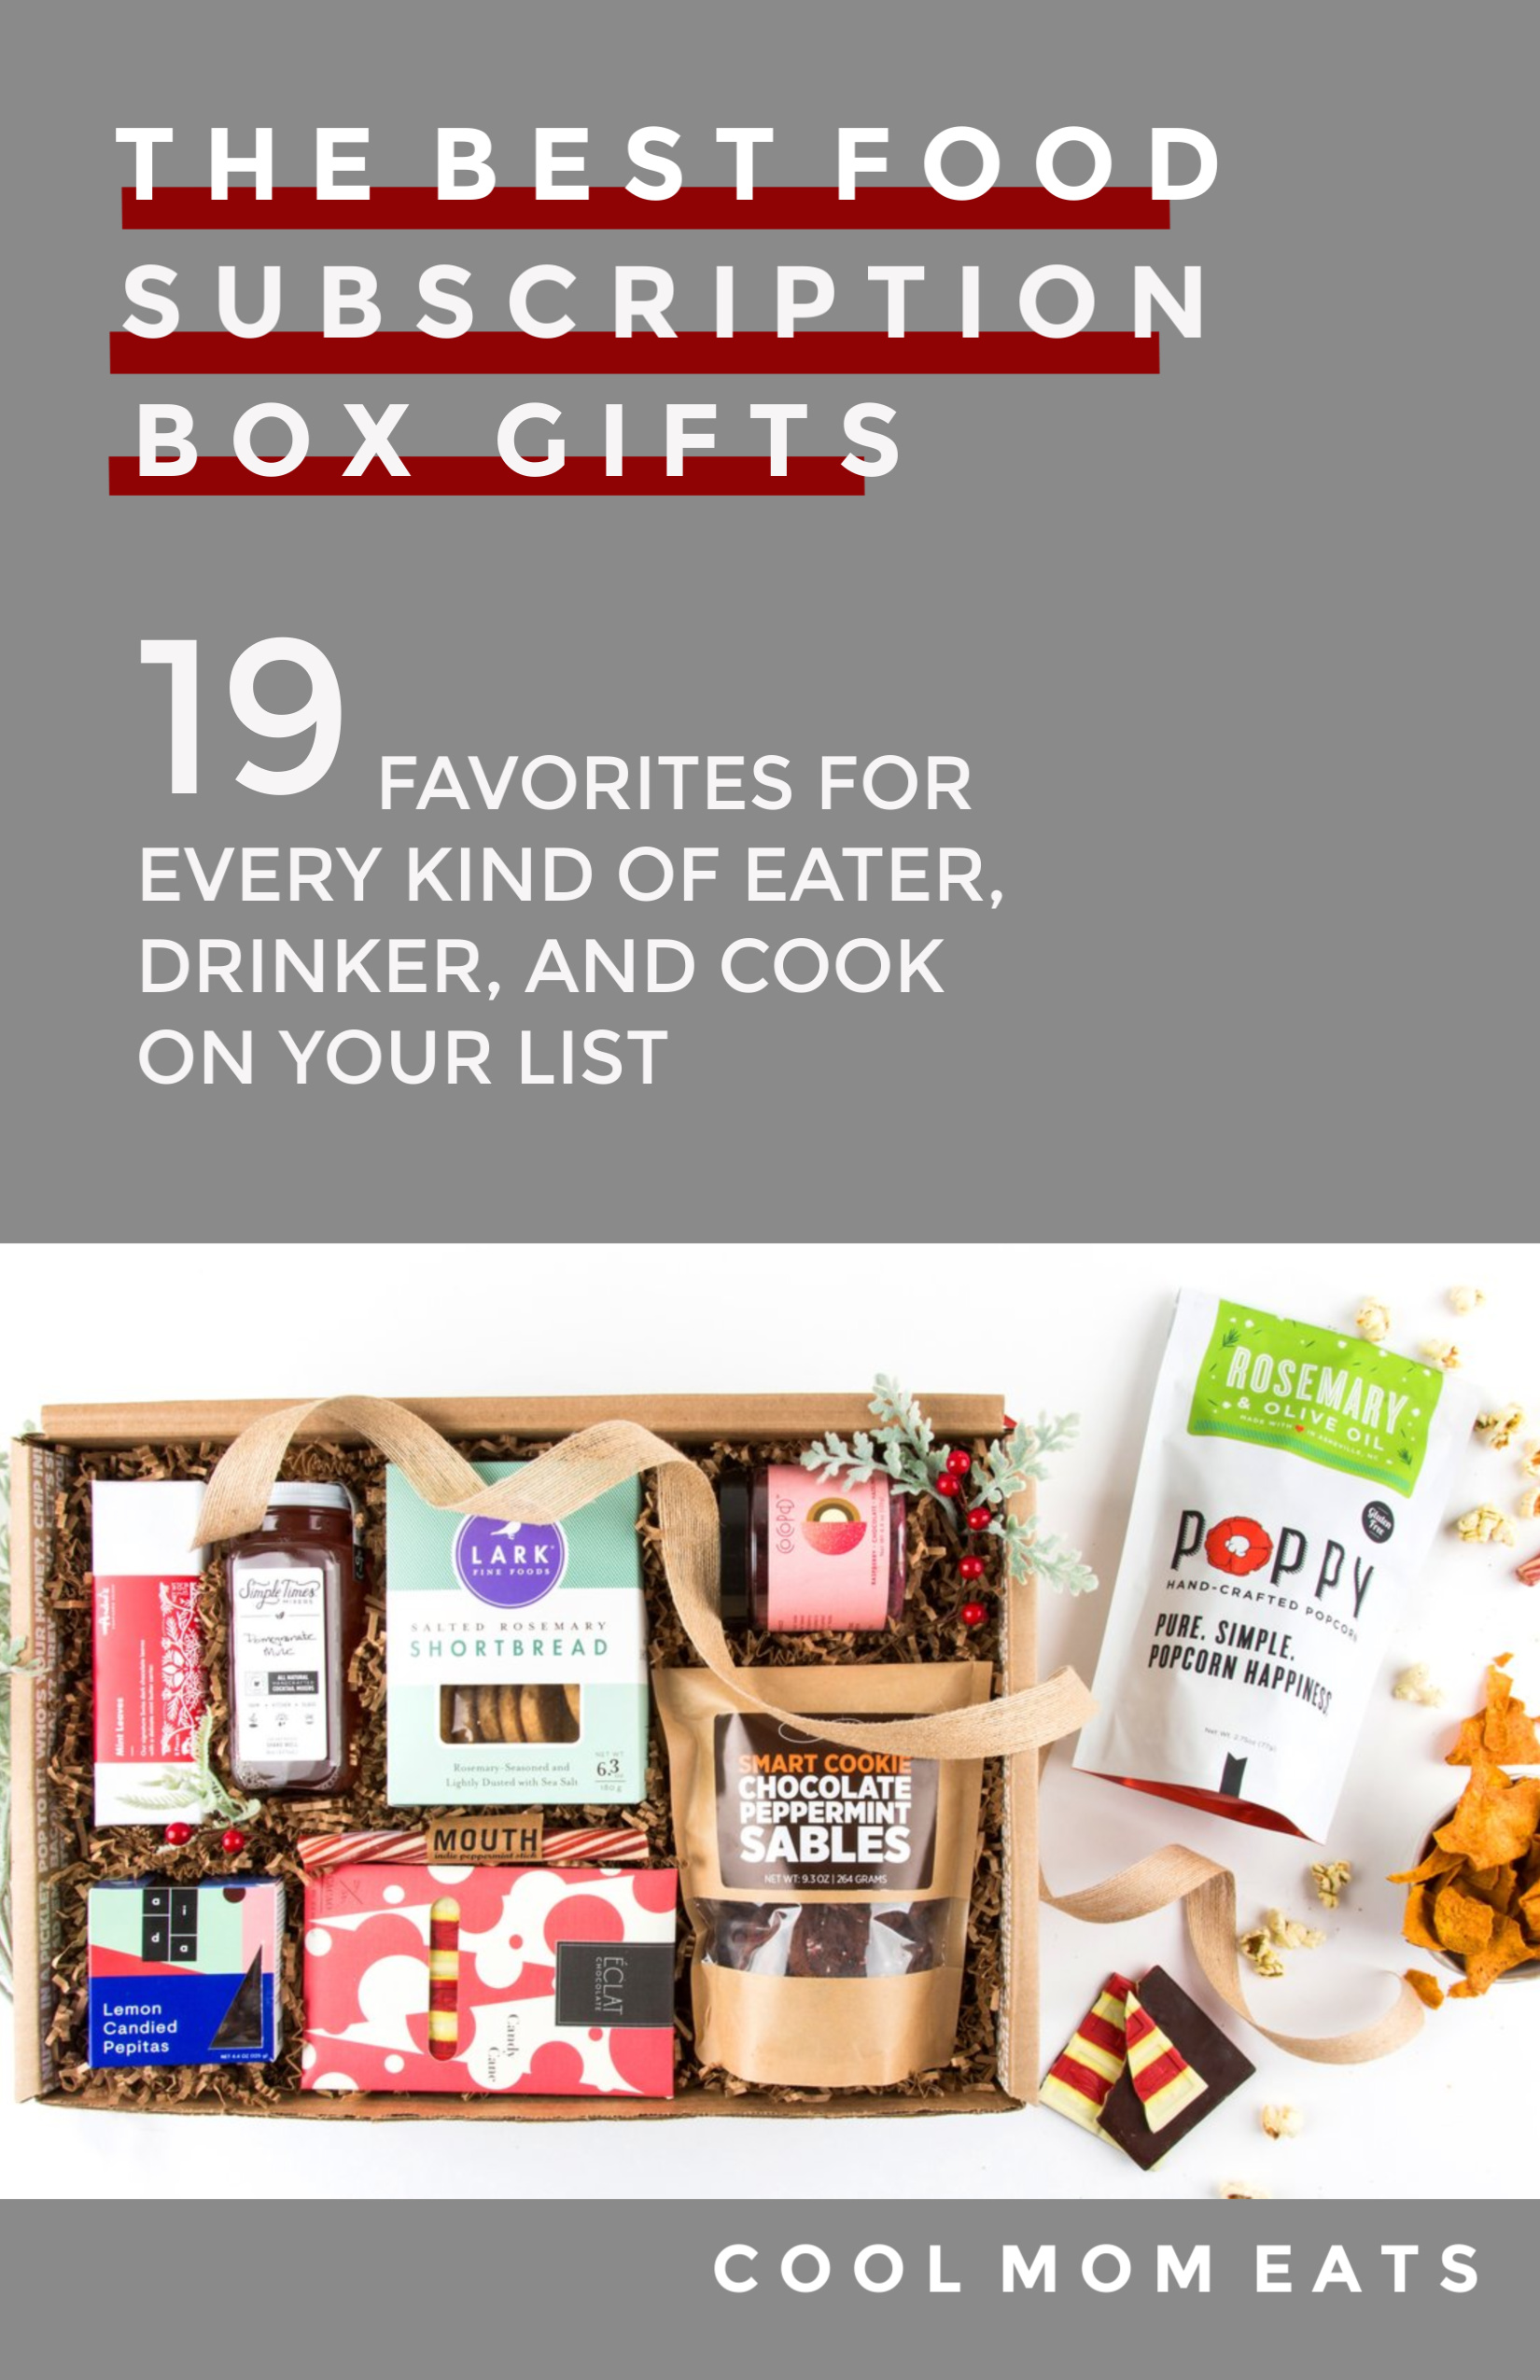 19 of the very best food subscription box gifts for every kind of eater, drinker, and cook on your list